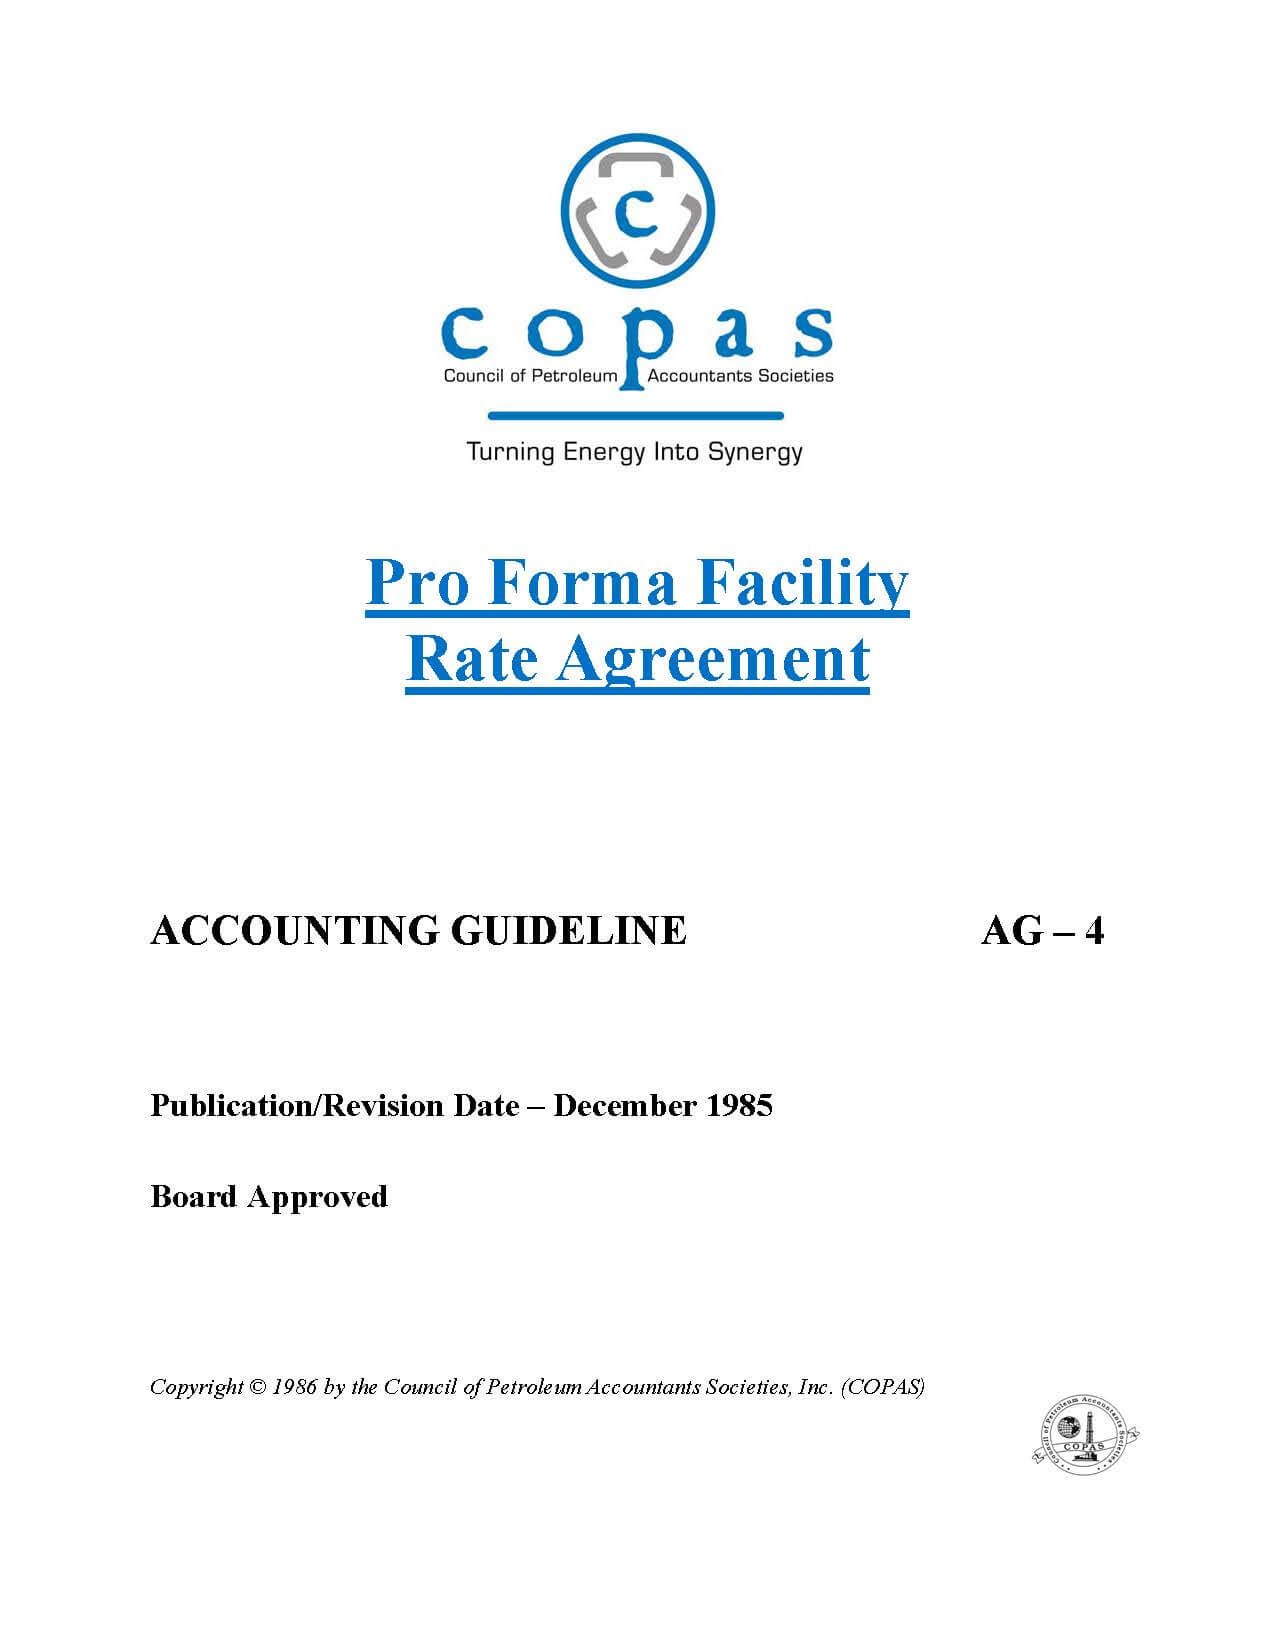 AG-4 Proforma Facility Rate Agreement